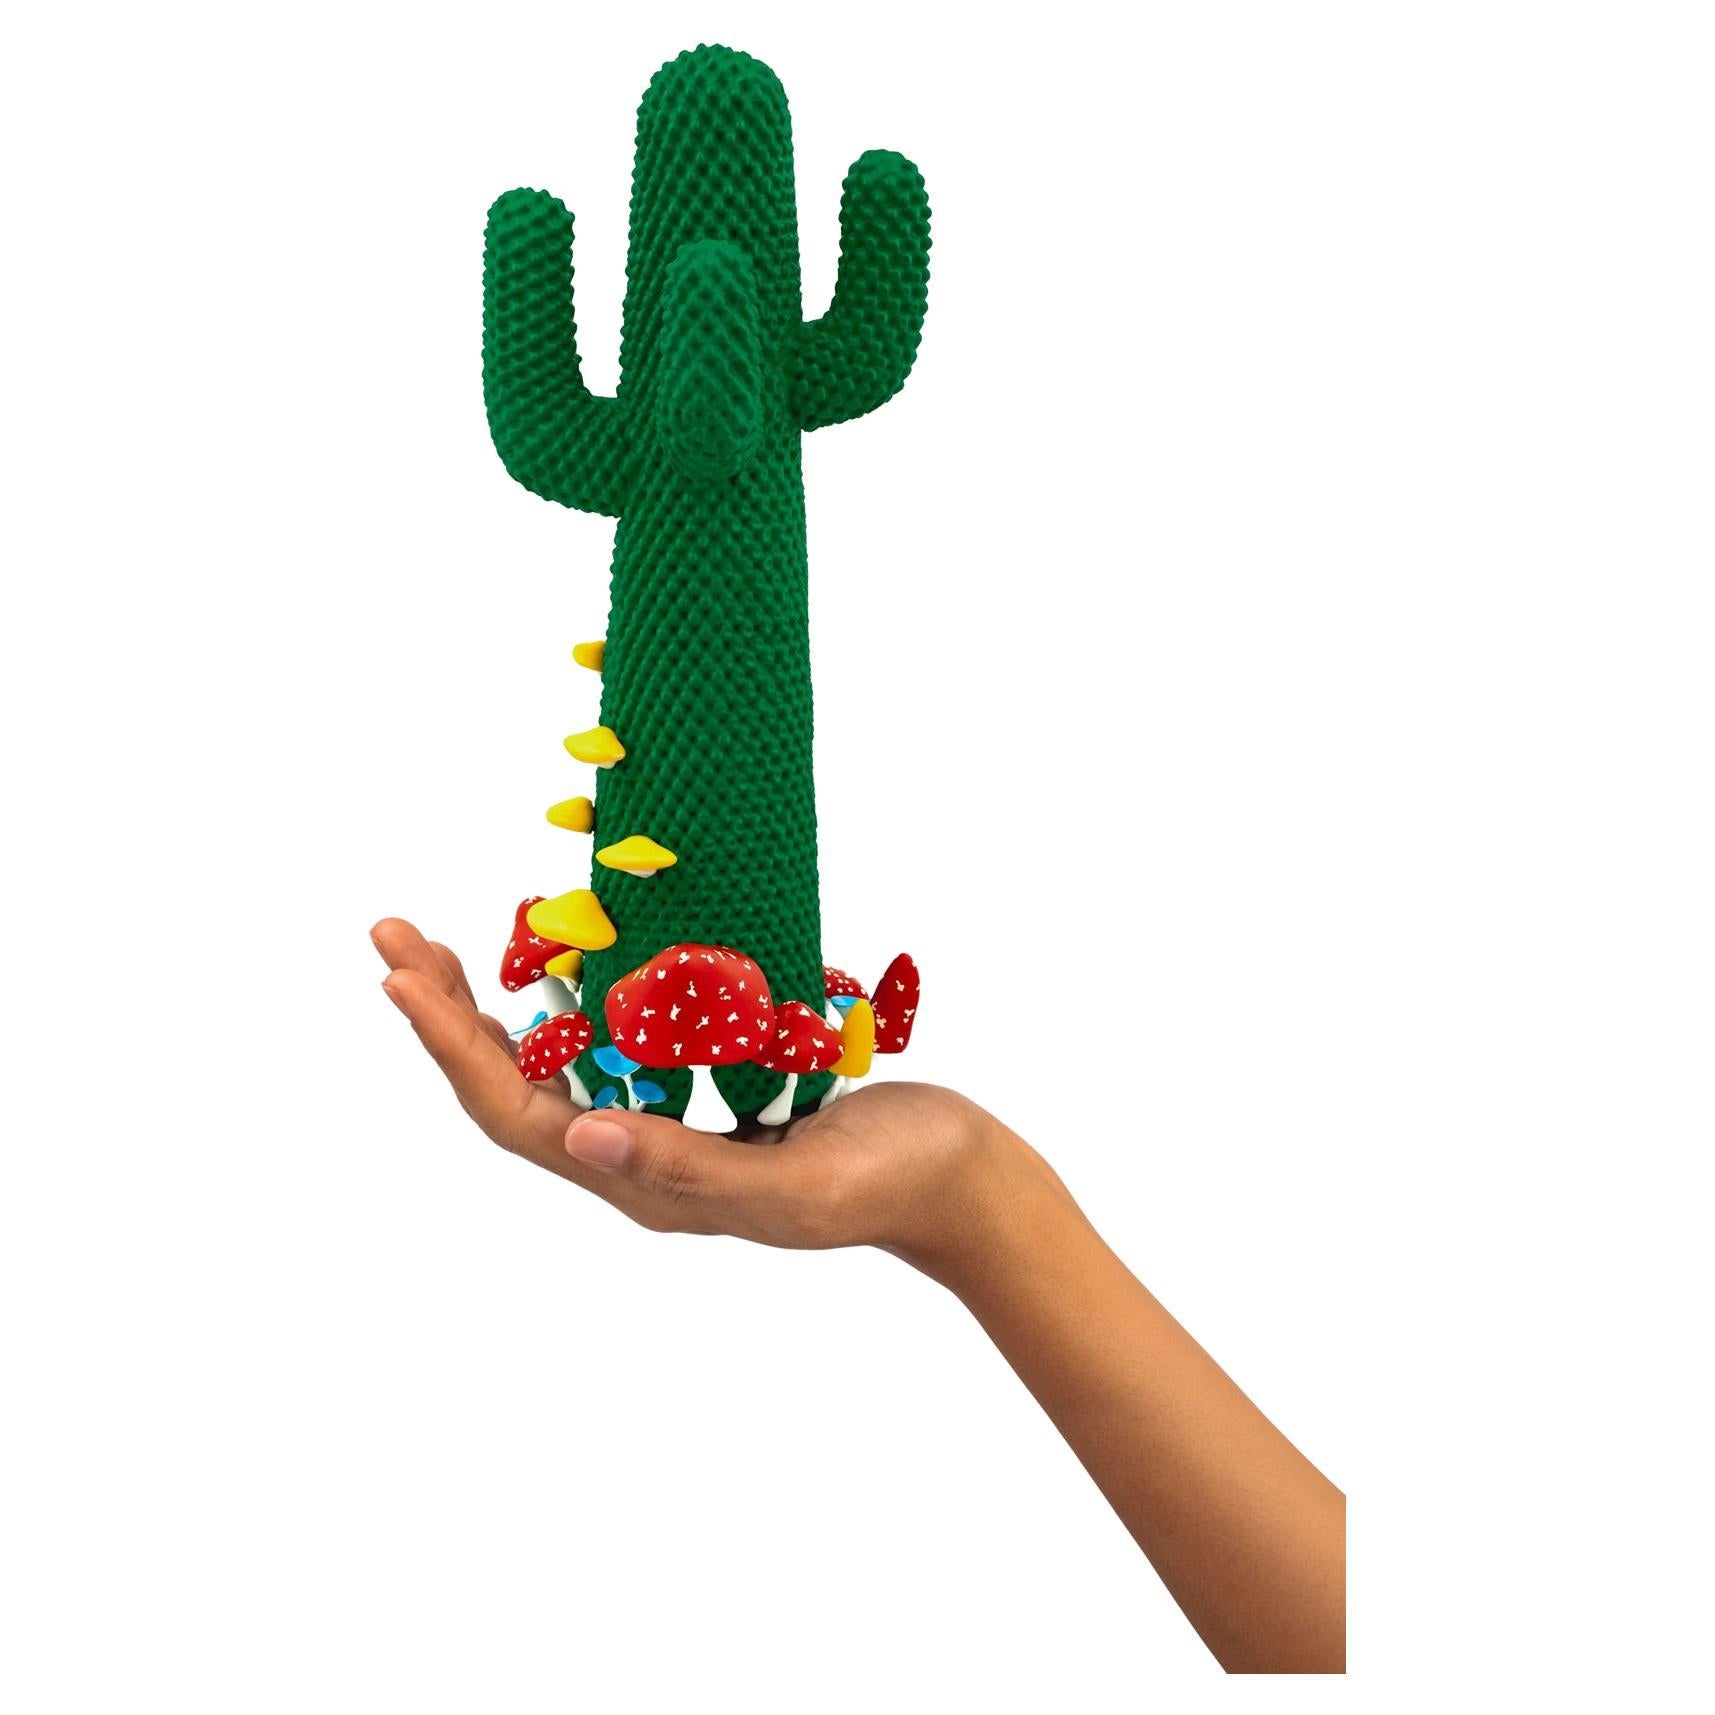 LIMITED EDITION #93/99

Gufram presents the miniaturised version of the Shroom CACTUS® created in collaboration with A$AP Rocky and the artist’s new design studio HOMMEMADE Exactly as the real-size Shroom CACTUS®, the new Guframini piece features